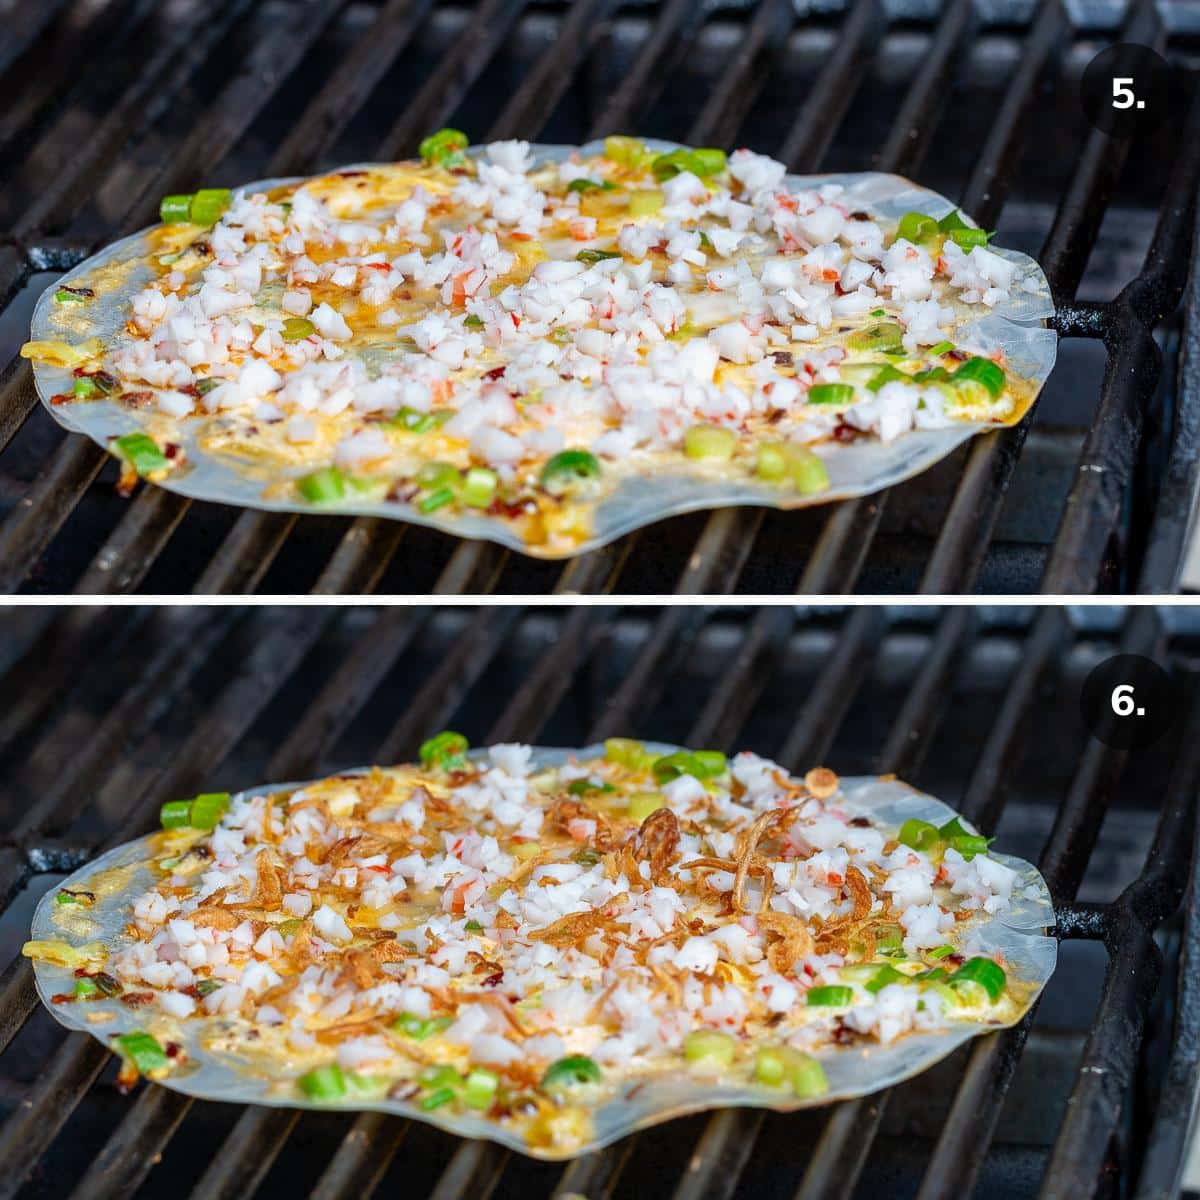 Topping the grilled Vietnamese pizzas with crab meat and fried shallots.